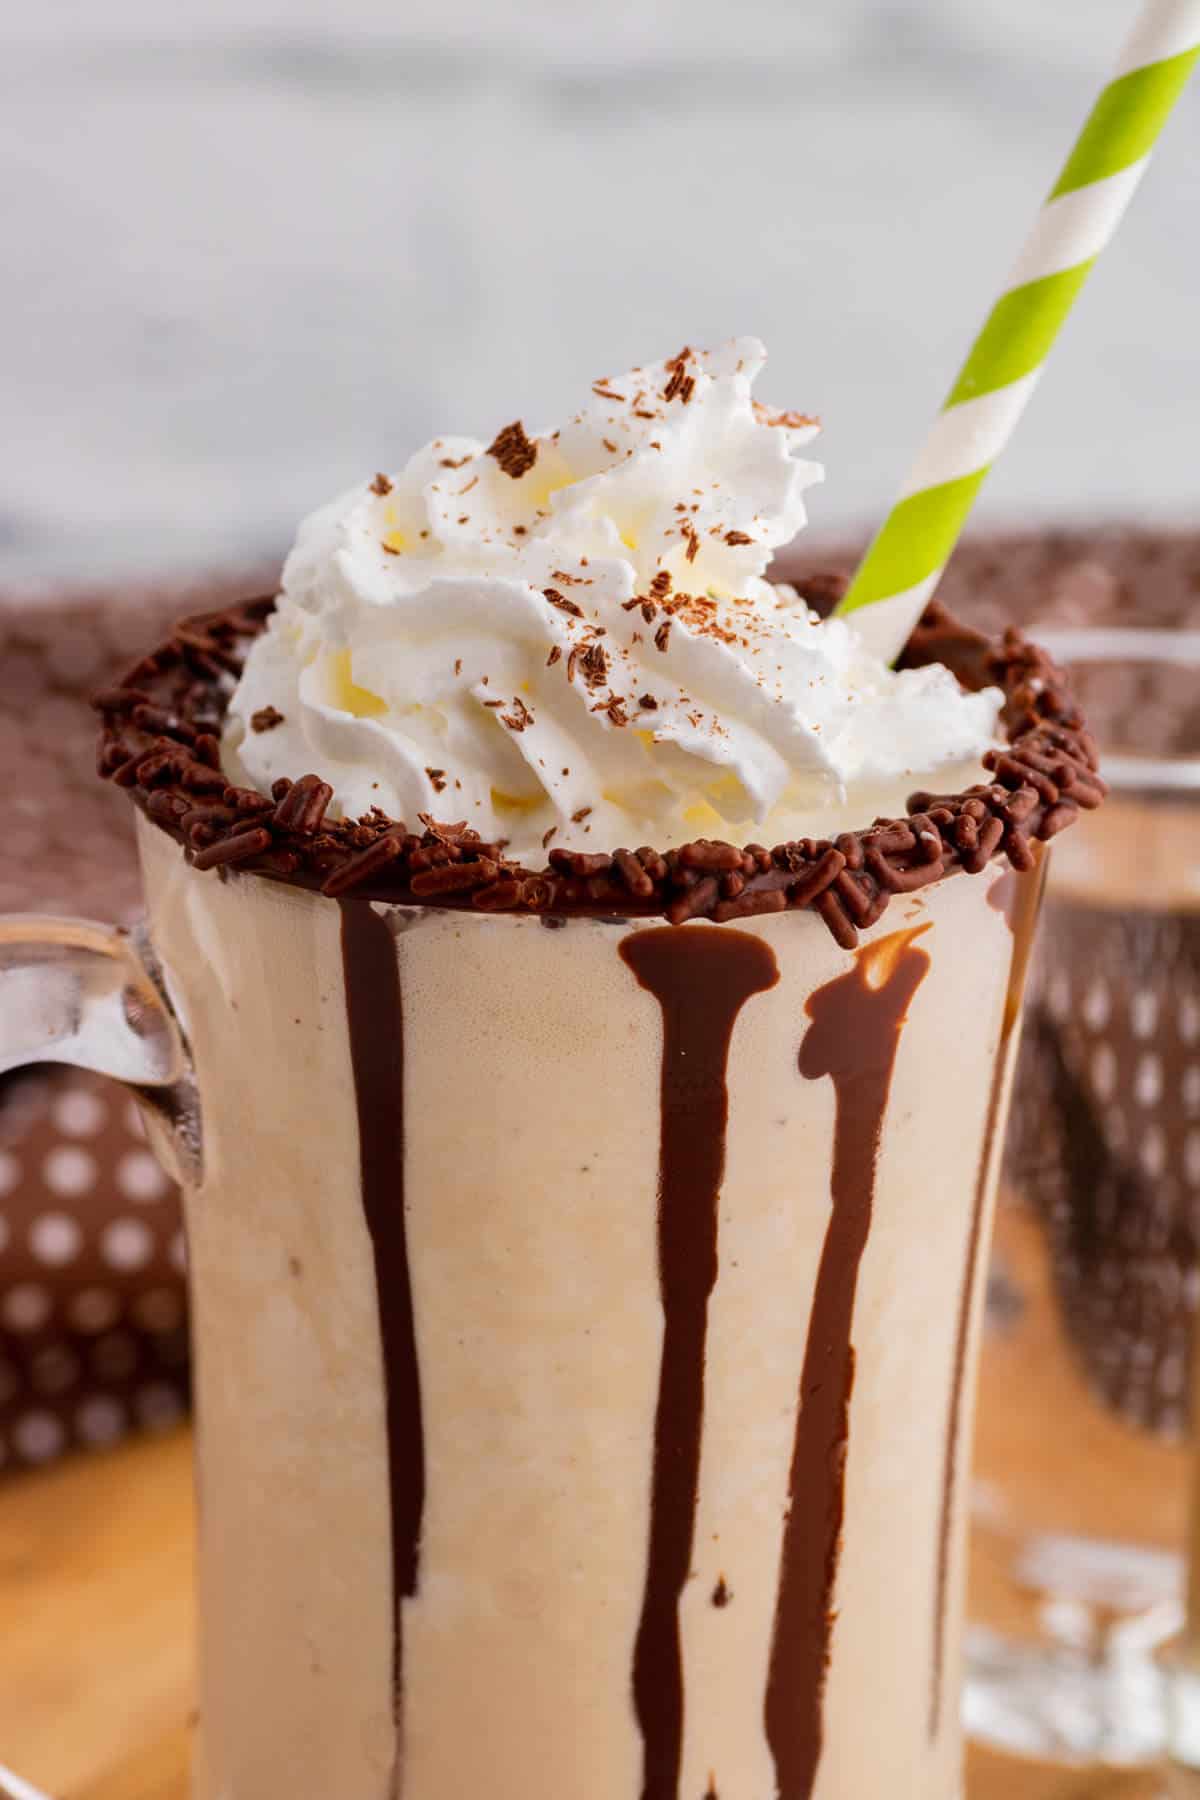 One chocolate rimmed glass mug containing frozen mudslide, whipped cream, and chocolate sauce.